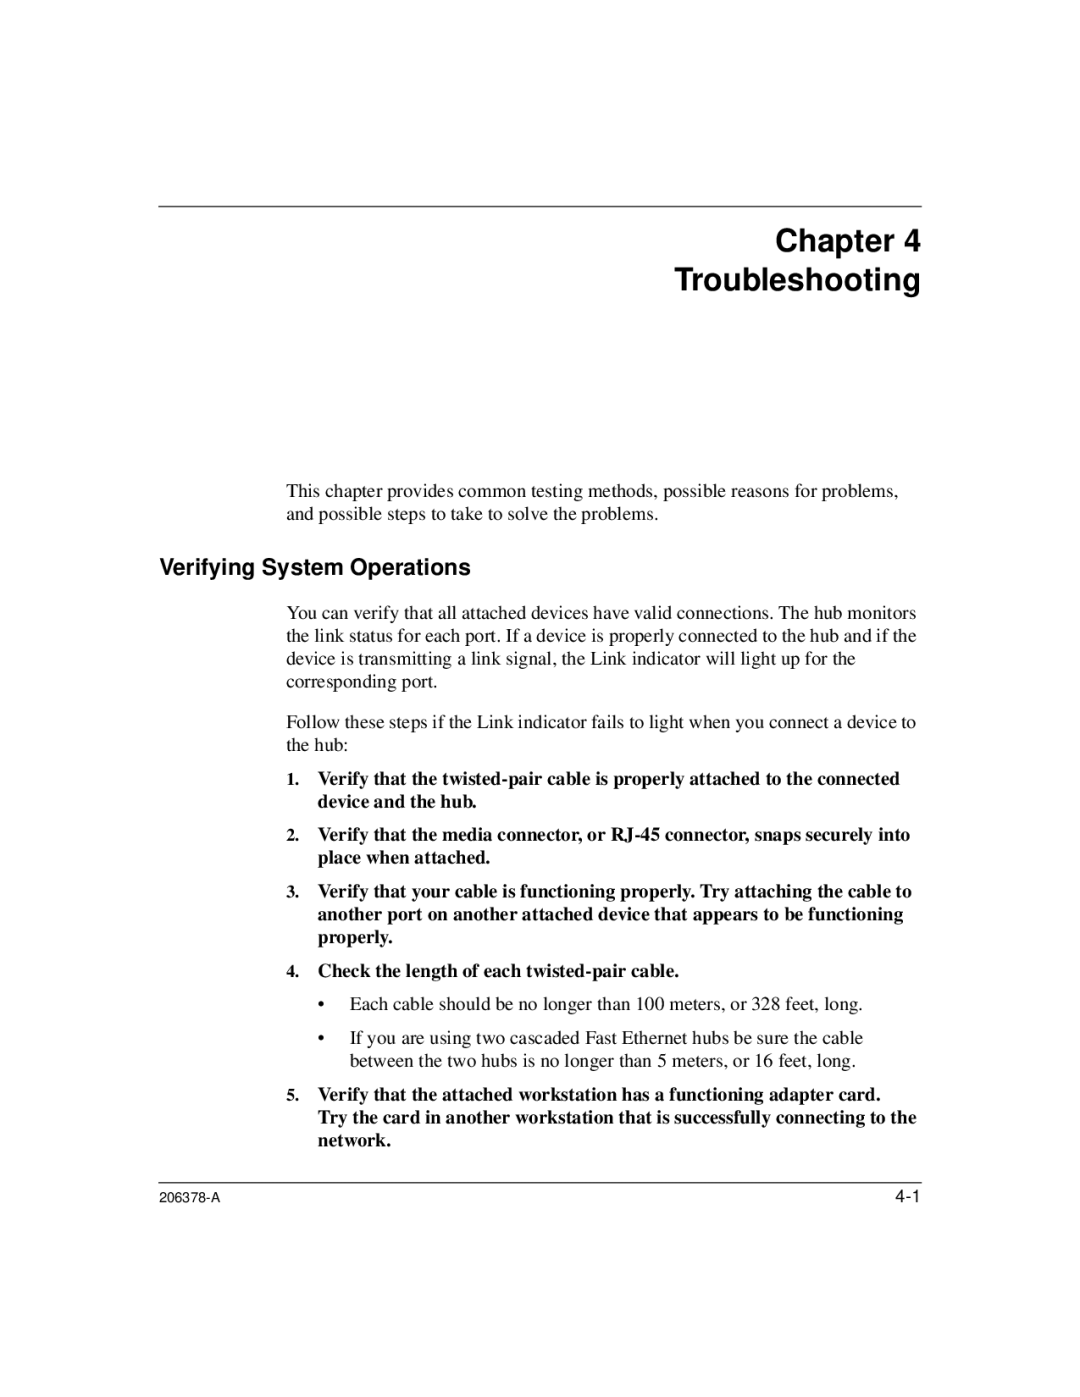 Nortel Networks 60-12T, 60-24T manual Chapter Troubleshooting, Verifying System Operations 